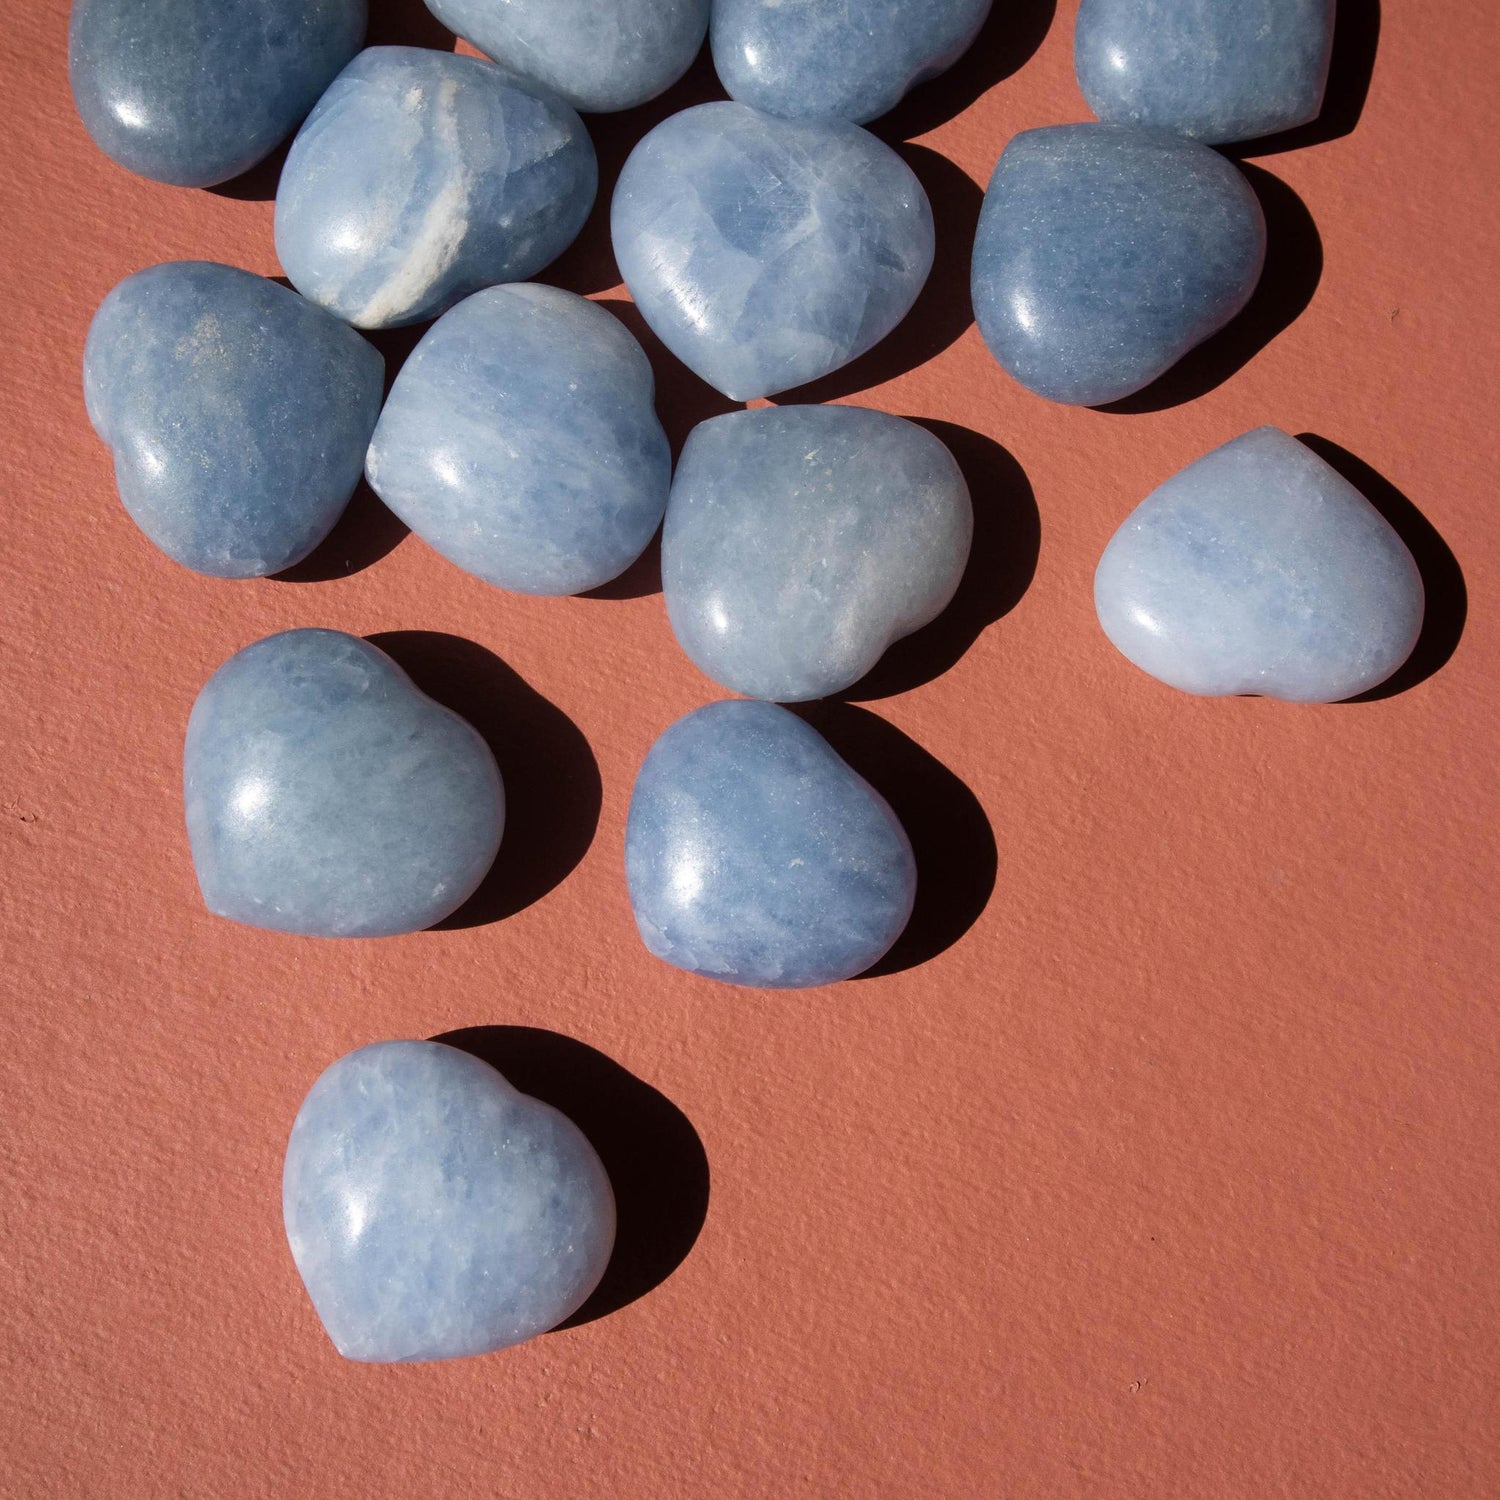 blue calcite, blue calcite heart, crystal heart, blue calcite crystal, blue calcite stone, blue calcite properties, blue calcite healing properties, blue calcite metaphysical properties, blue calcite meaning